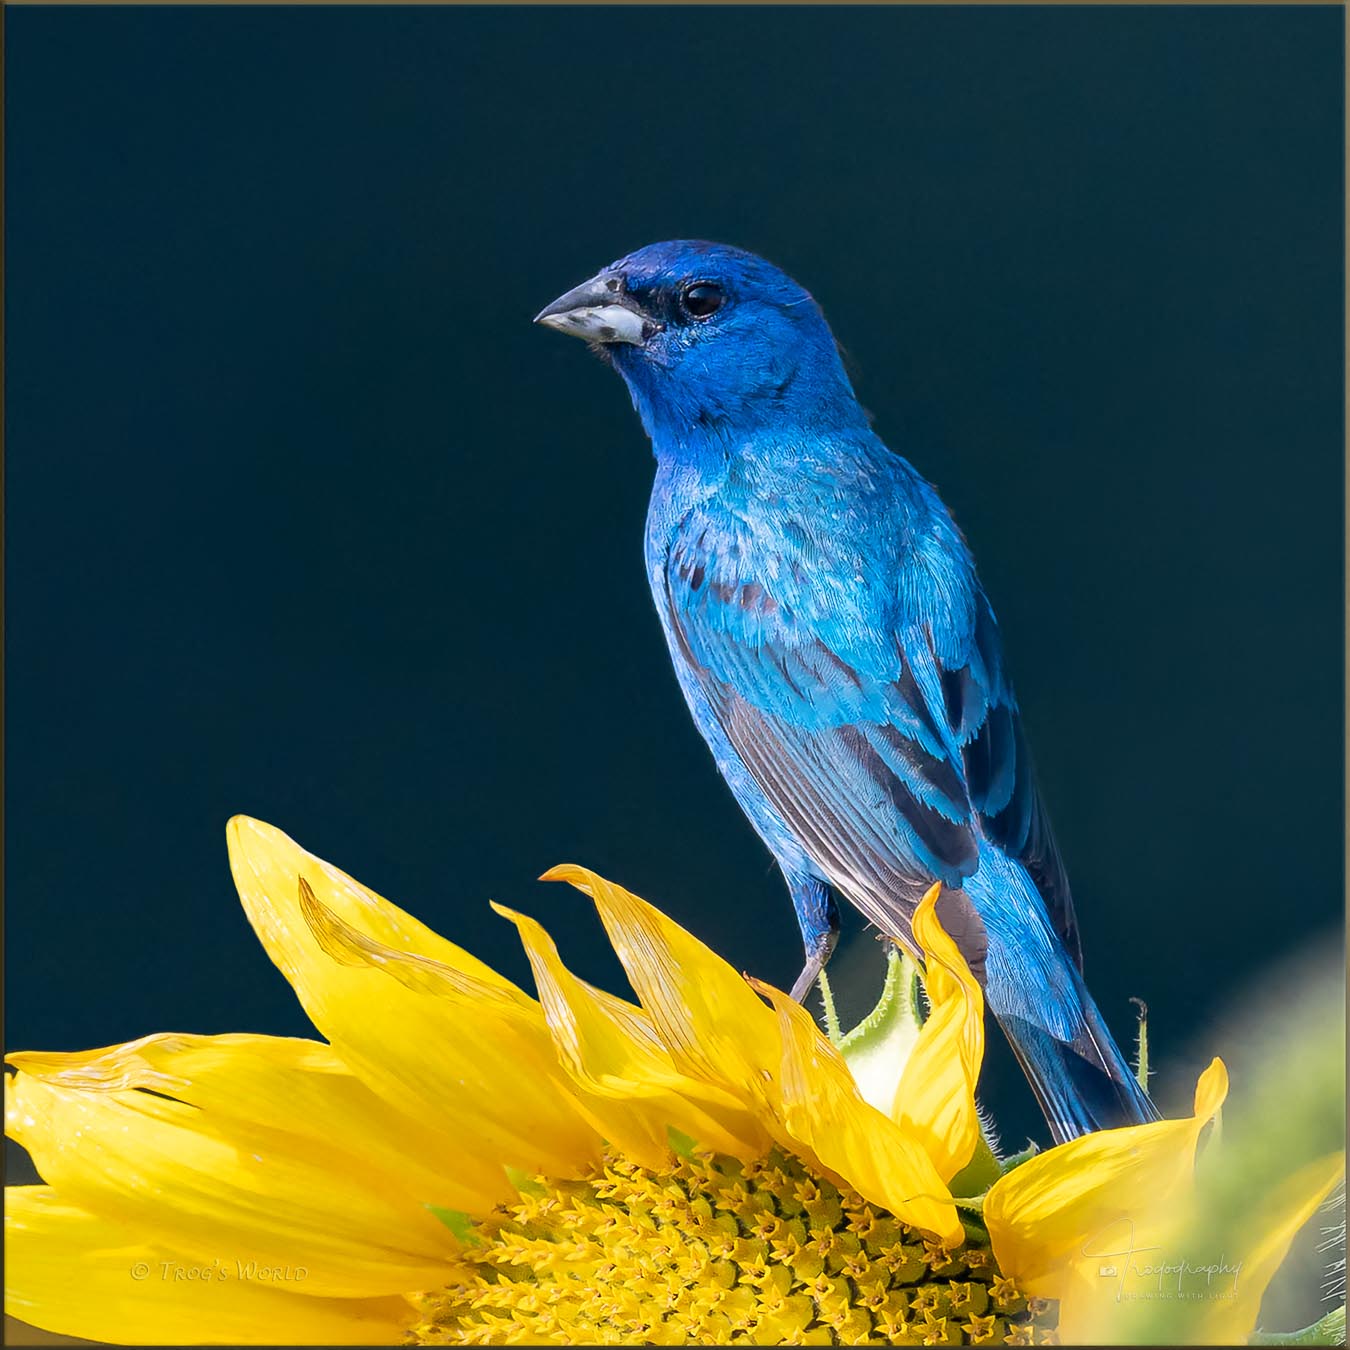 Indidgo Bunting on a sunflower